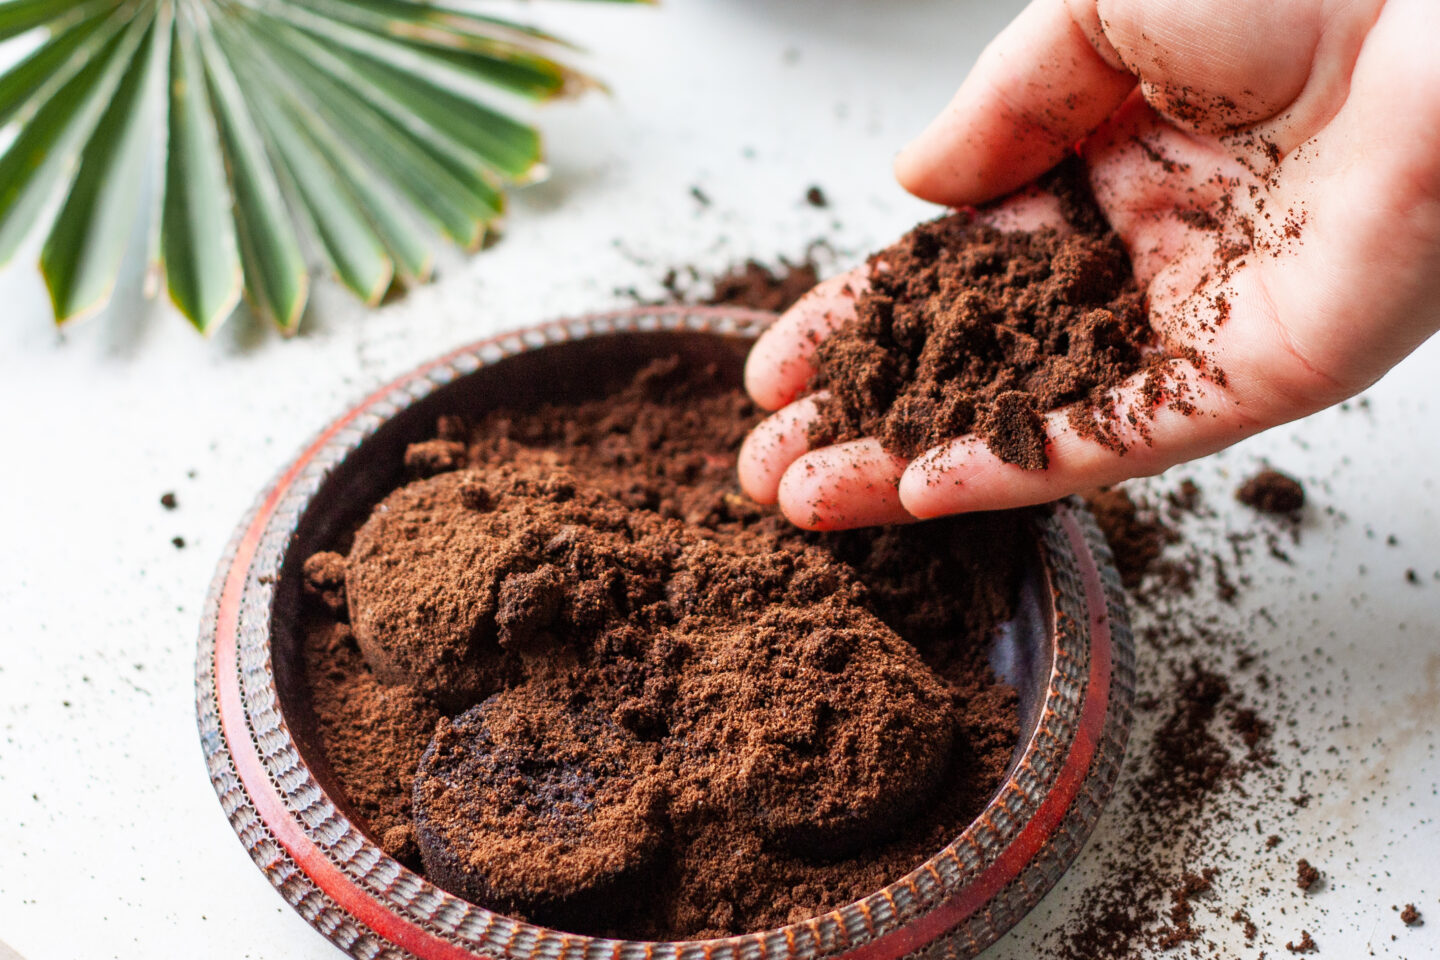 Woman's,Hand,Crumbles,Coffee,Grounds,Into,Wooden,Bowl.,Coffee,Grounds